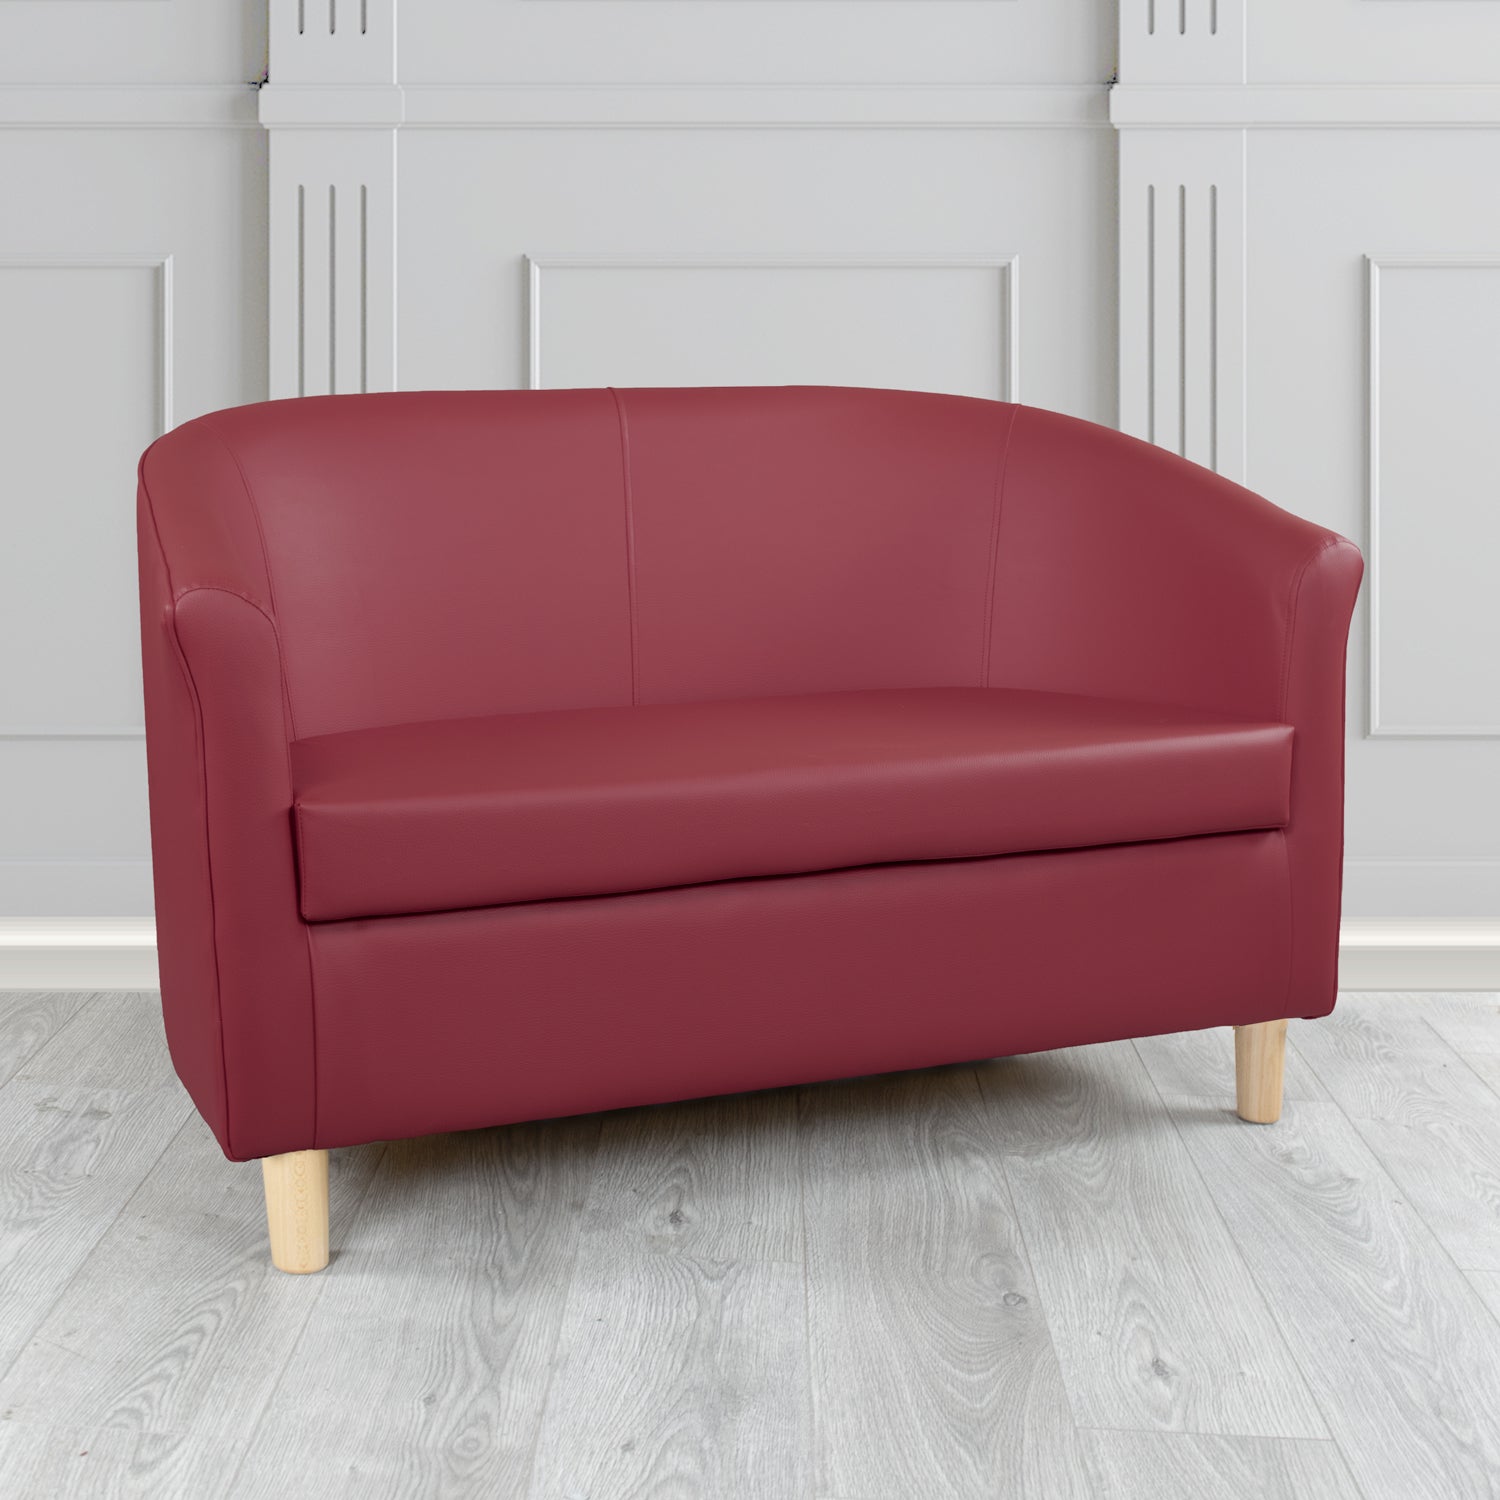 Tuscany Just Colour Jazzberry Crib 5 Faux Leather 2 Seater Tub Sofa - The Tub Chair Shop